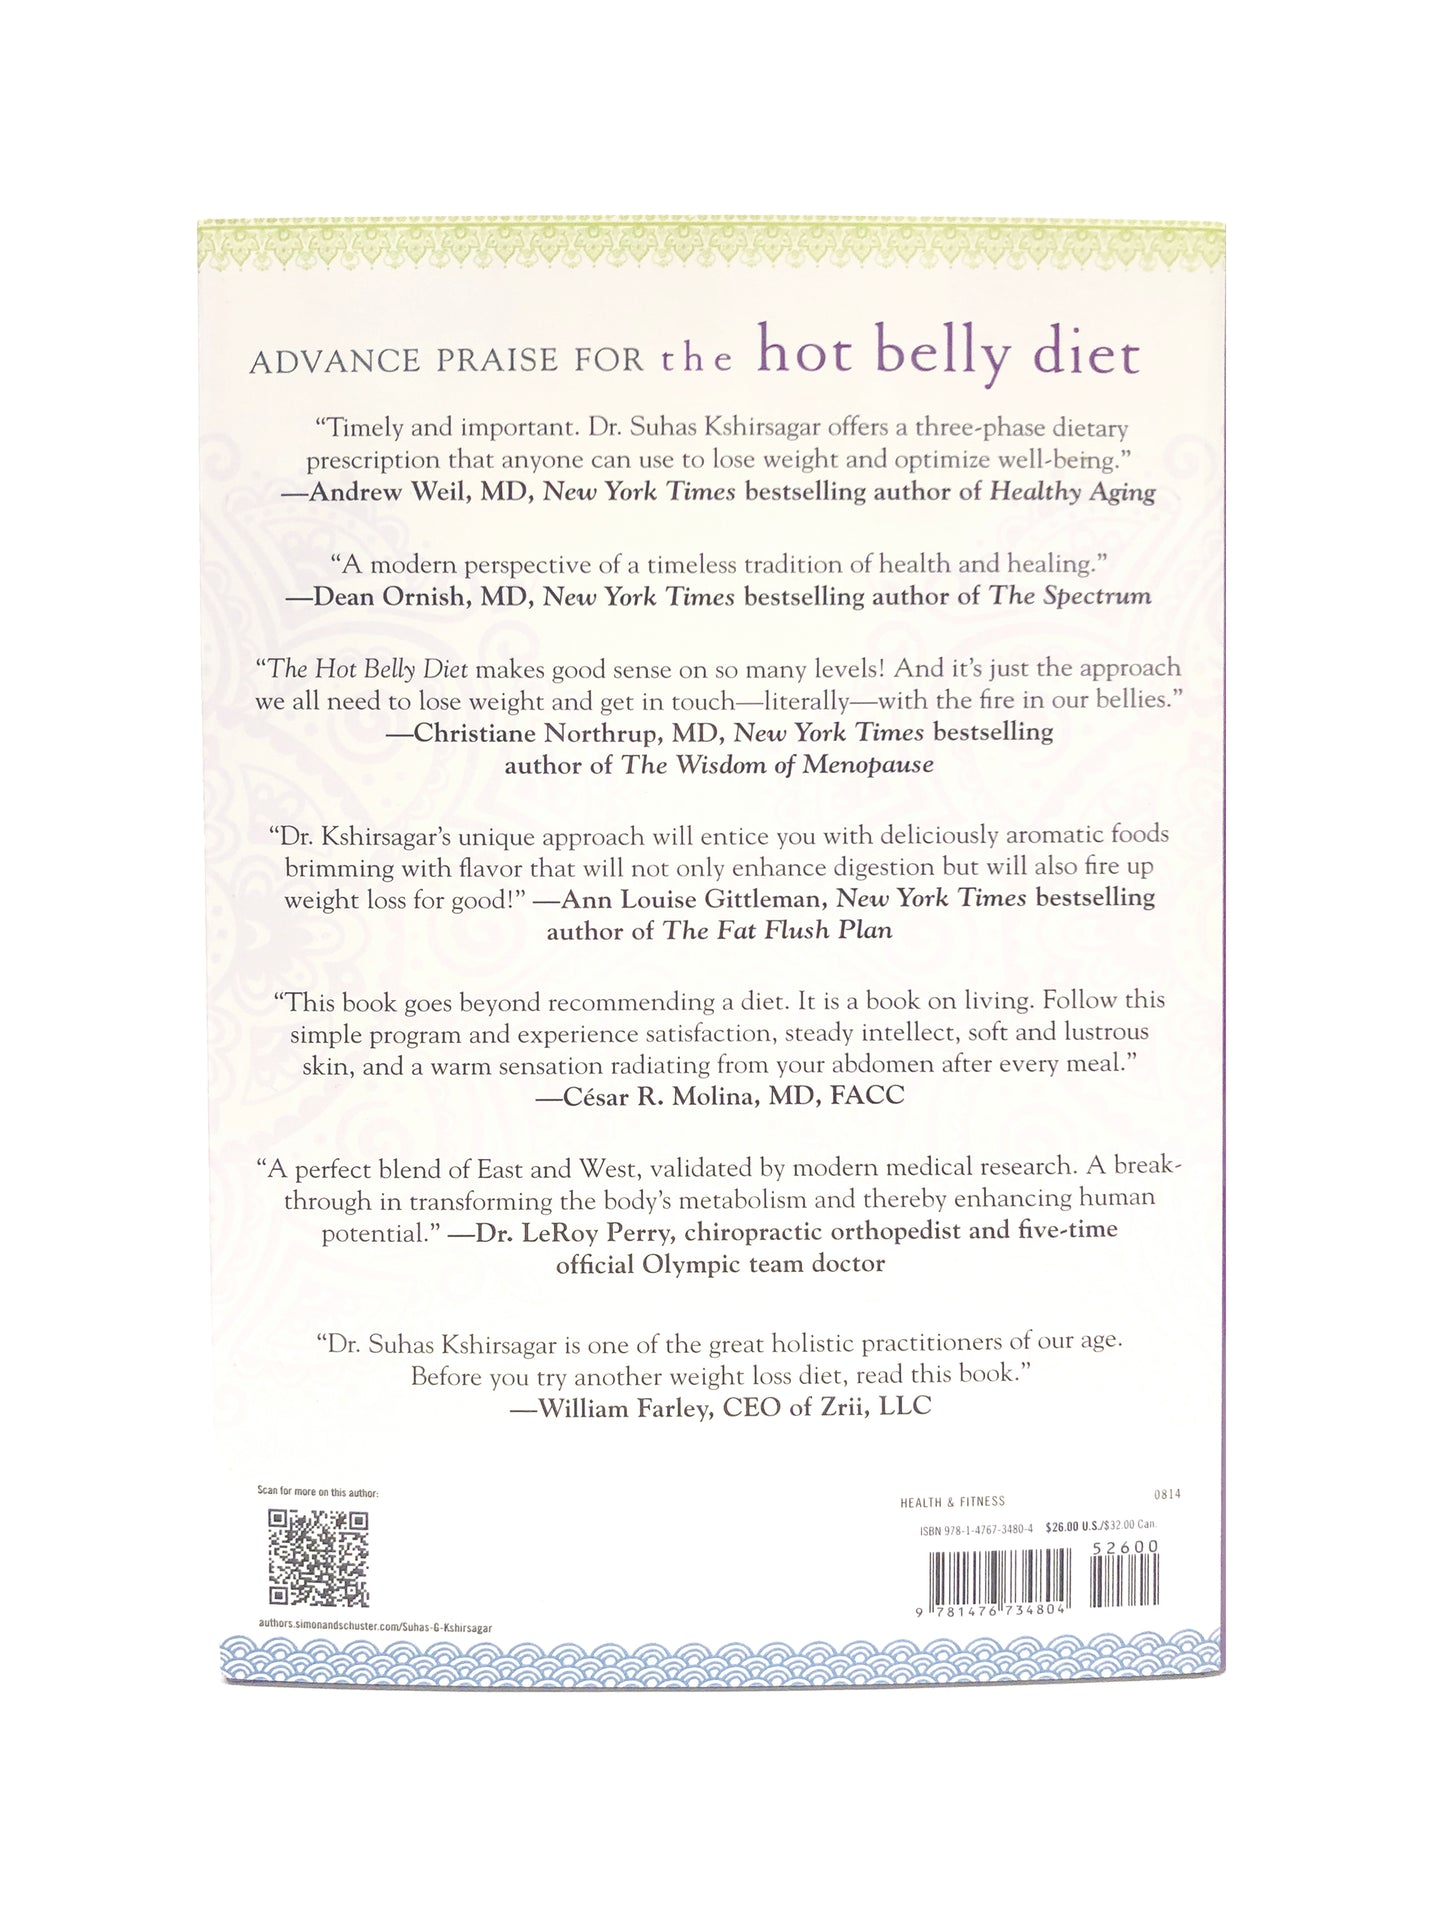 The Hot Belly Diet (Hard Cover) - Author: Dr Suhas G. Kshirsagar